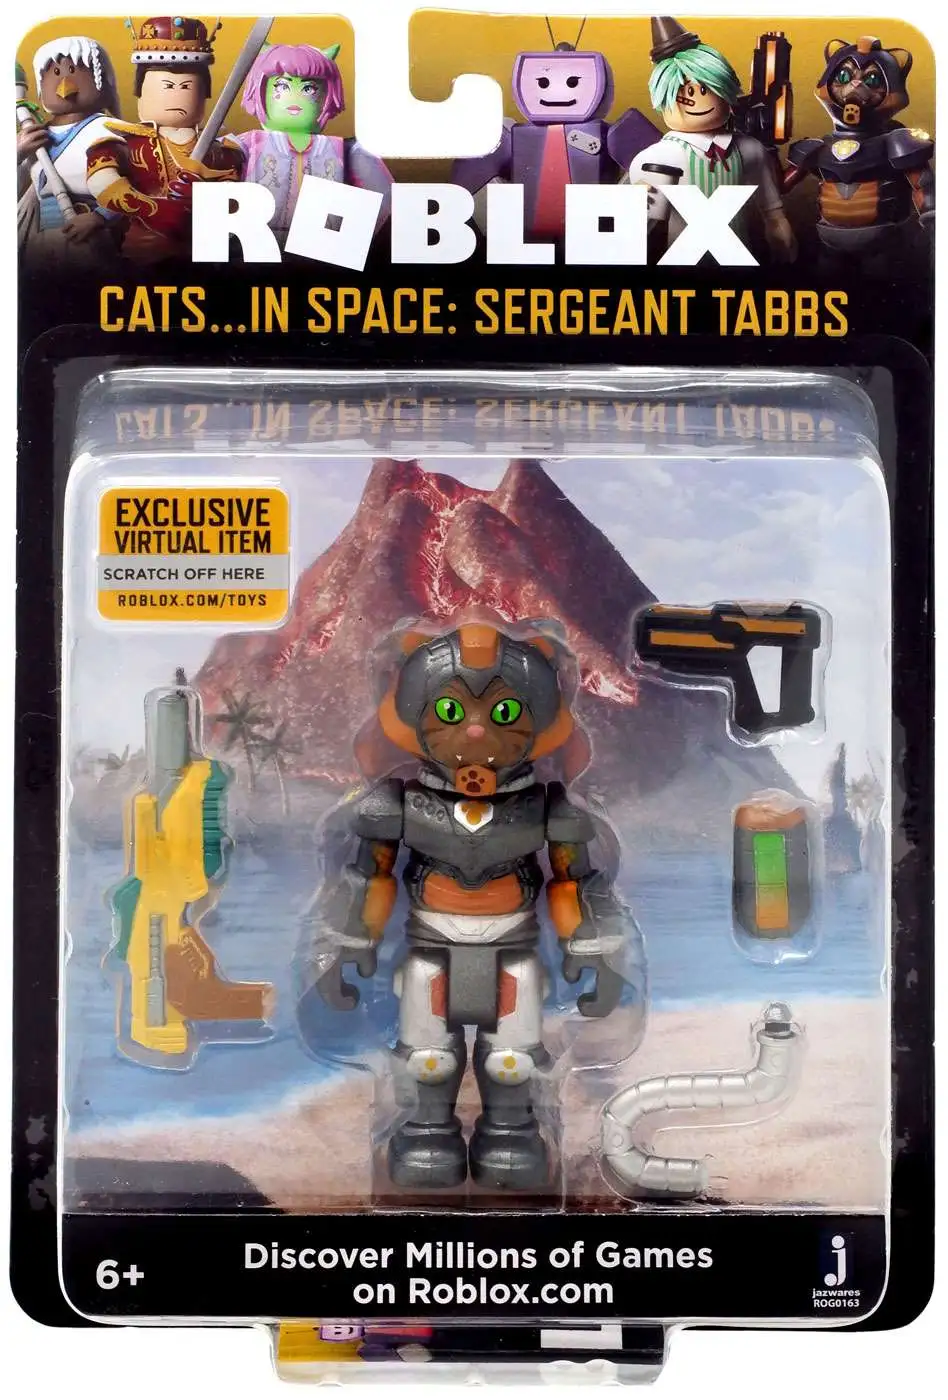 Sergeant Tabbs 2.75 Inch Figure with Exclusive Virtual Item Code Roblox Cats...in Space